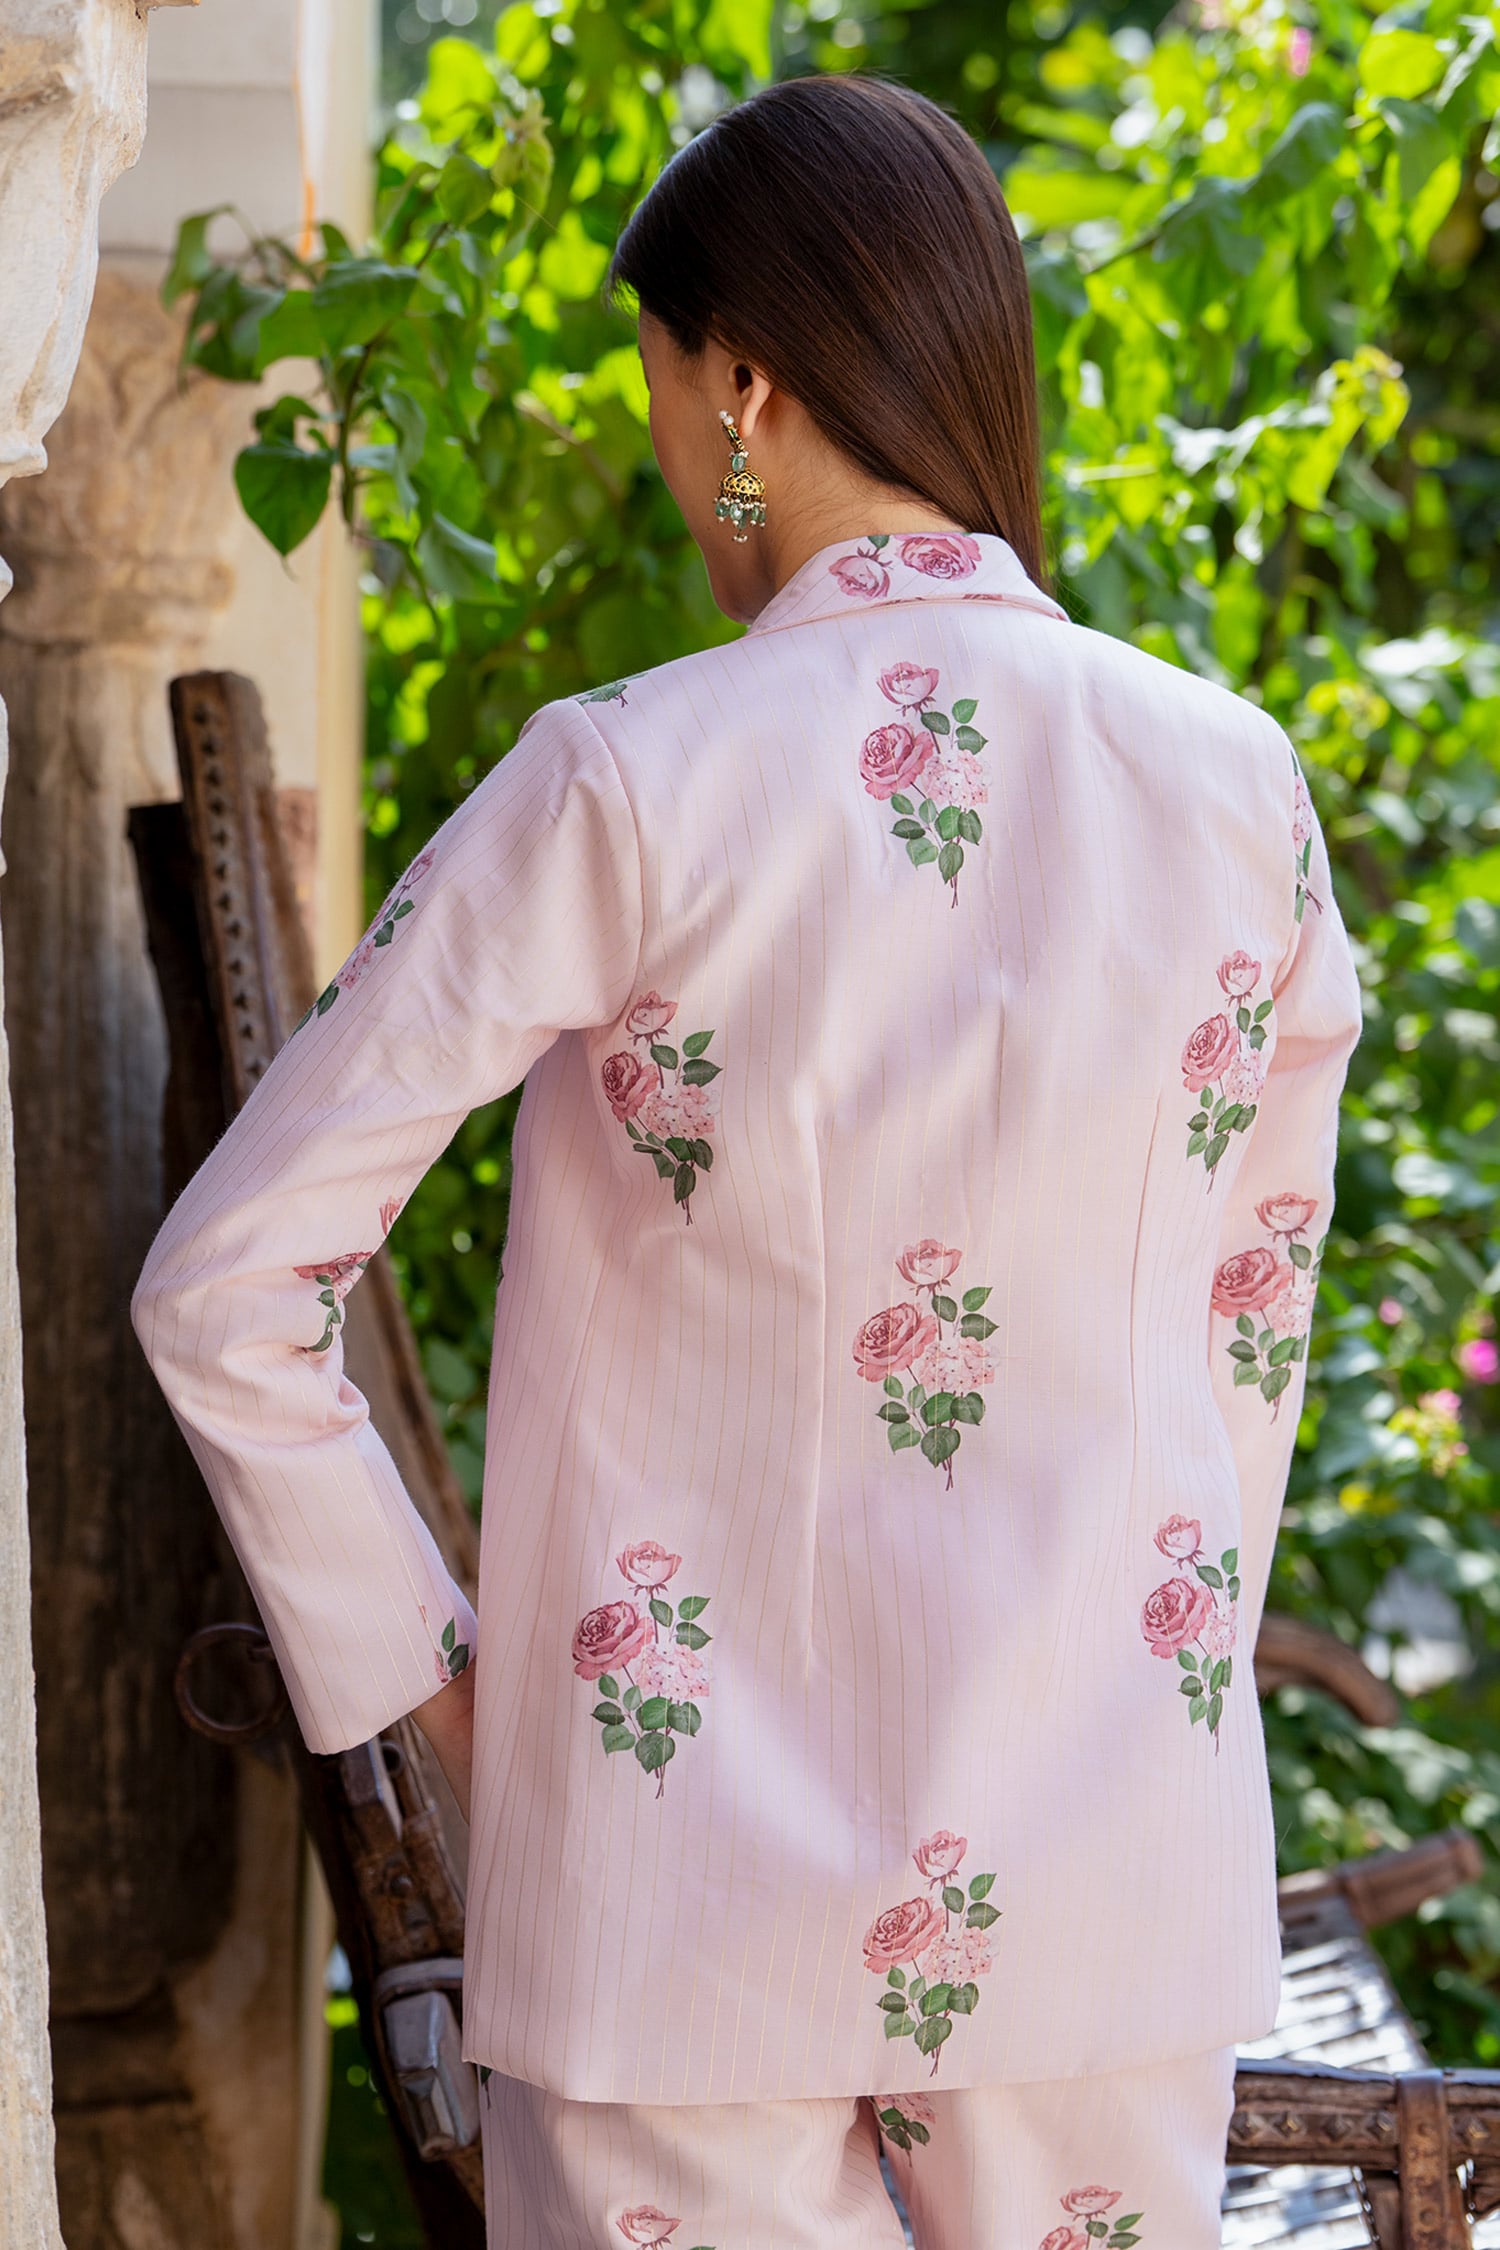 Buy Hot Pink Pant Suit Online In India - Phases by Alisha – phasesbyalisha